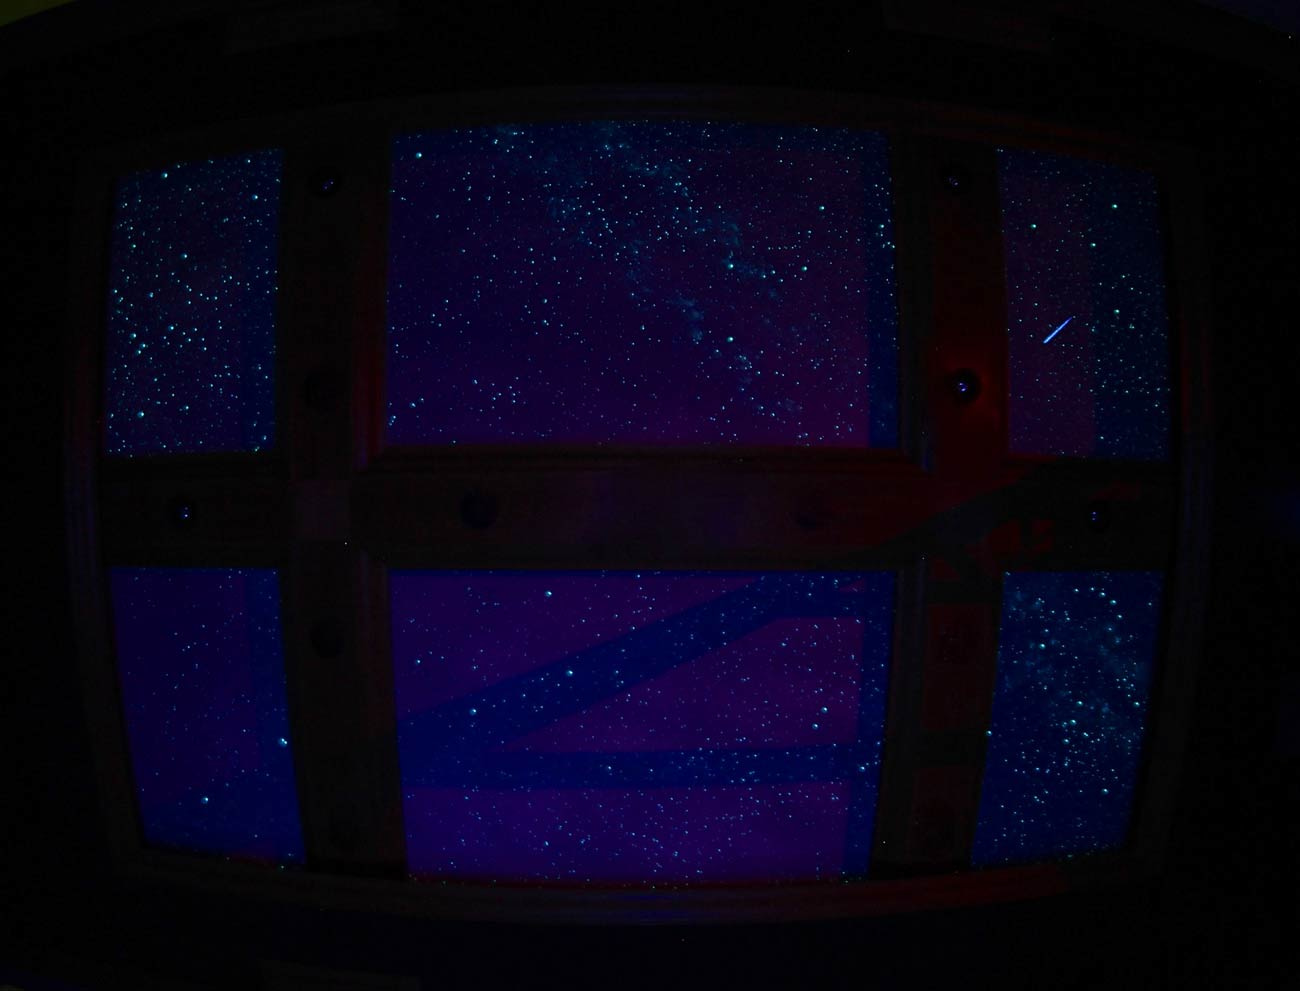 Night Sky Mural on ceiling with beams - with blacklights on